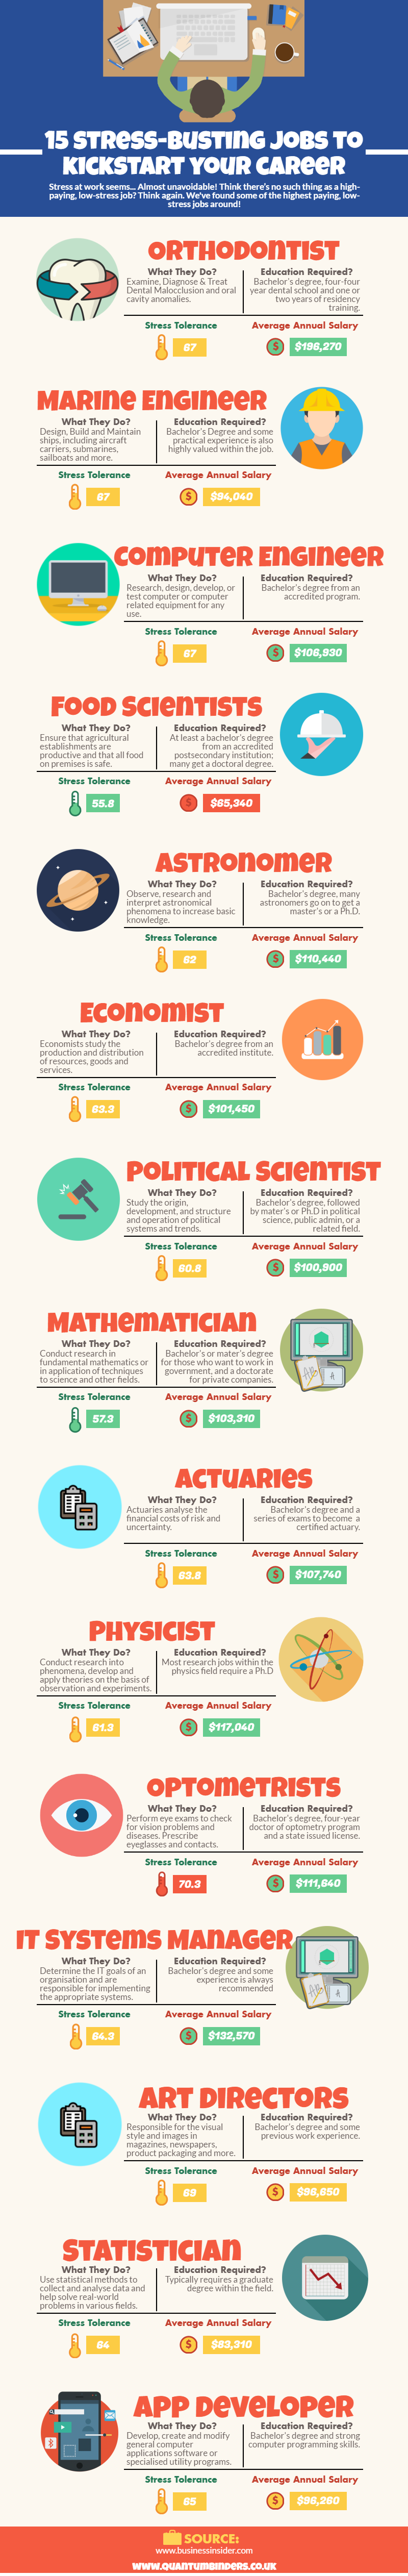 Stress-Busting Jobs Infographic